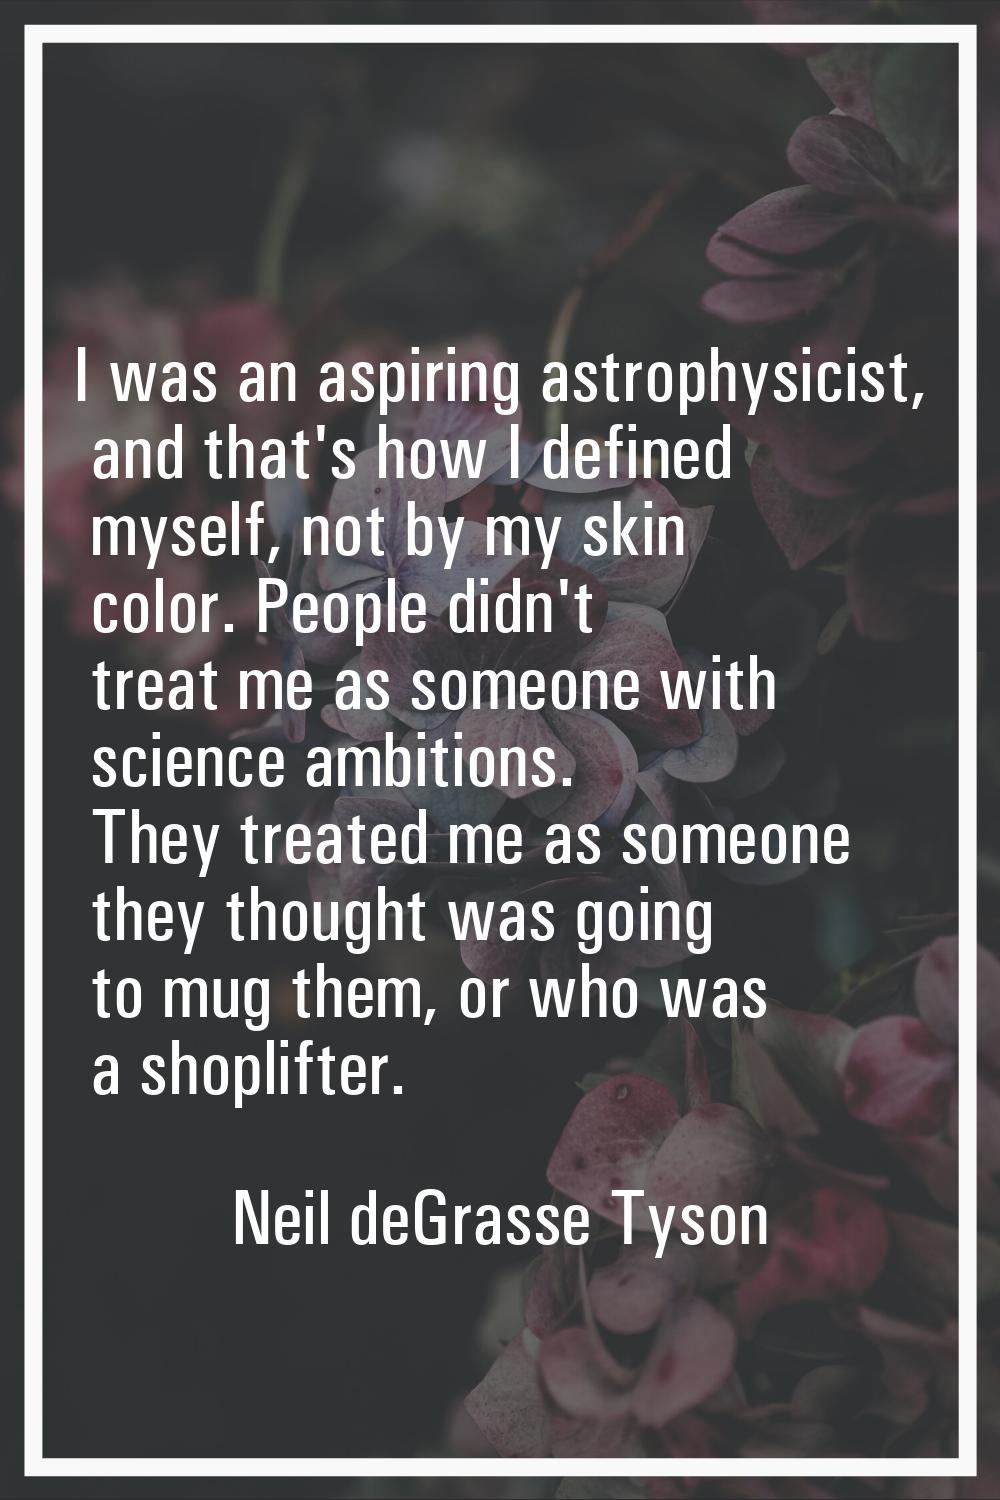 I was an aspiring astrophysicist, and that's how I defined myself, not by my skin color. People did